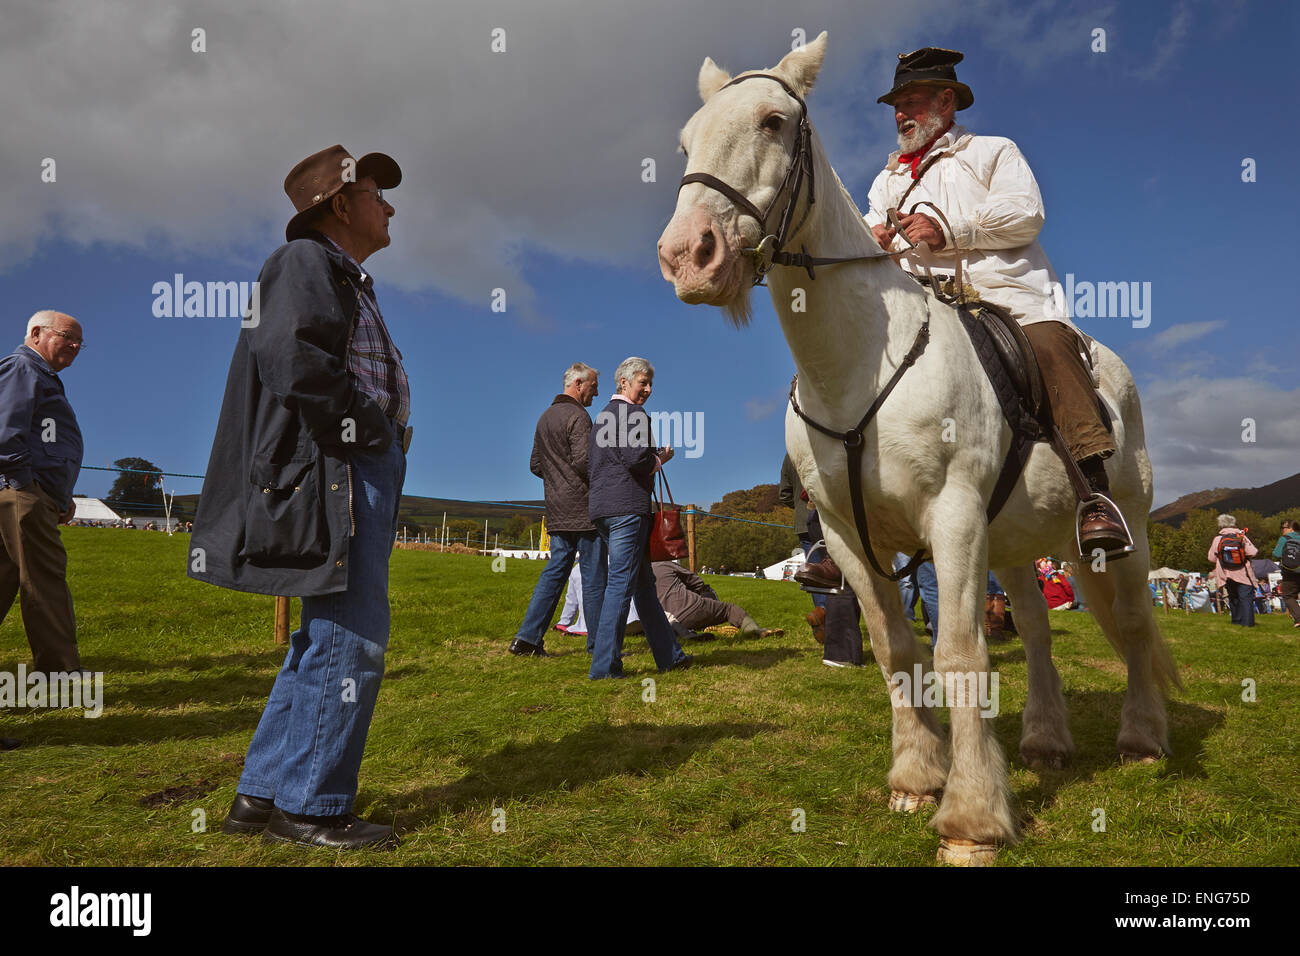 Uncle Tom Cobley All High Resolution Stock Photography and Images - Alamy